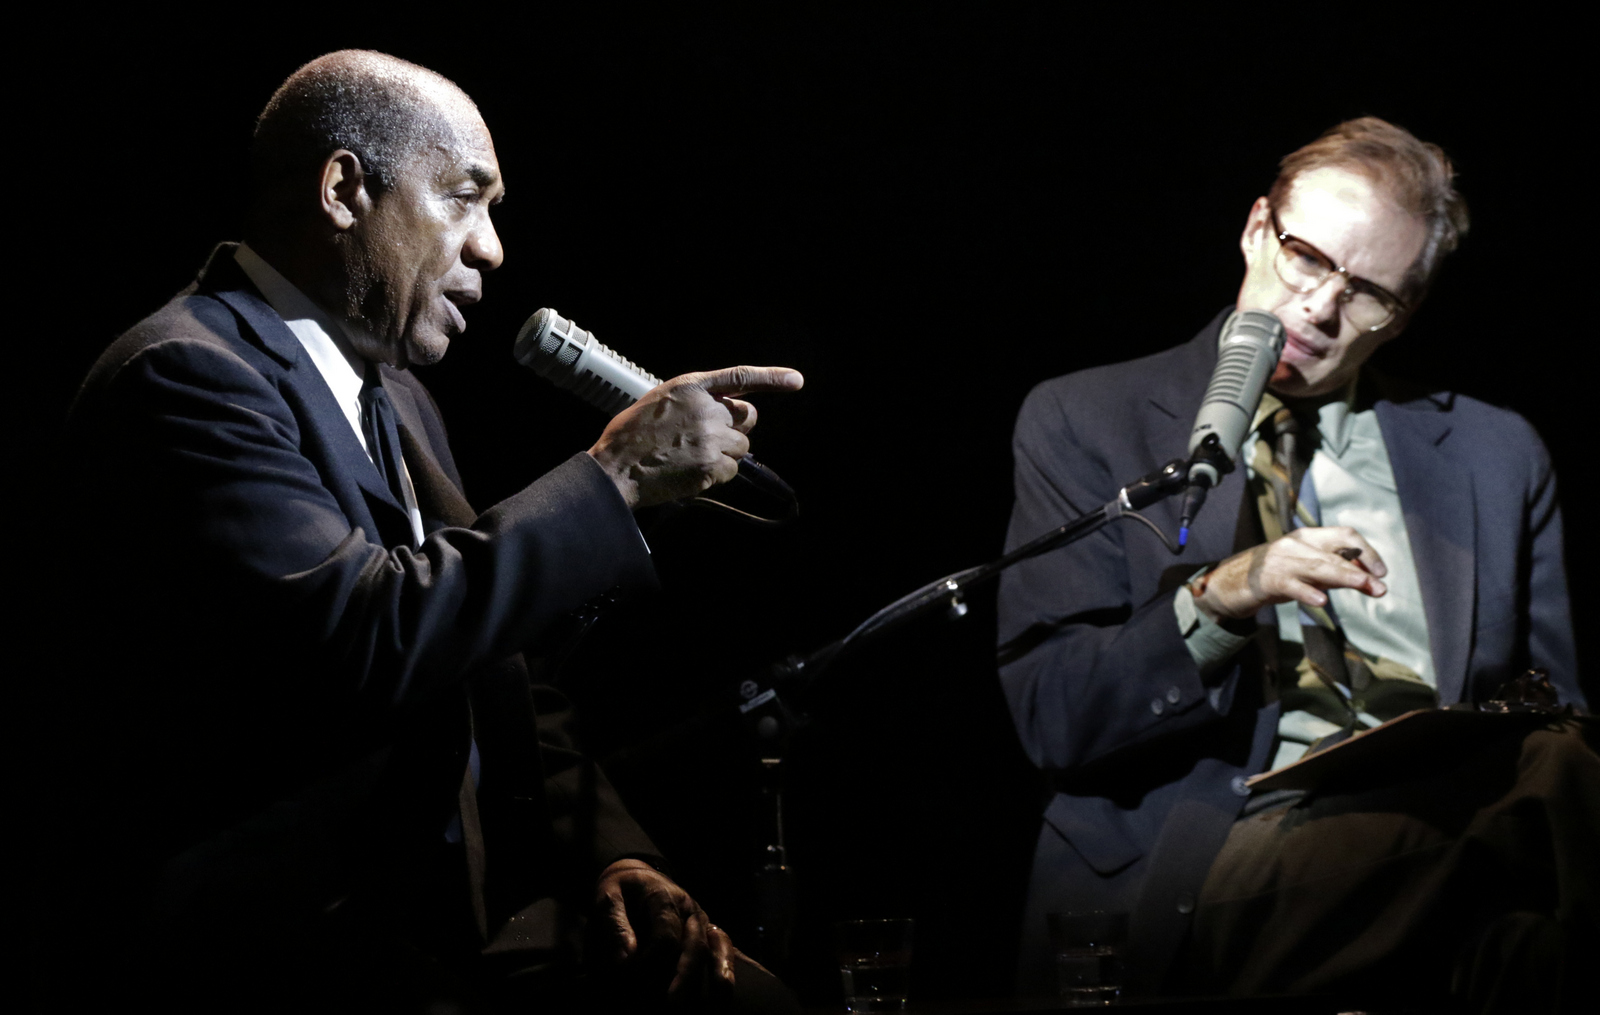 Turn Me Loose at the Wallis Annenberg Center for the Performing Arts. Pictured (l-r): Joe Morton and John Carlin. Photo credit: Lawrence K. Ho.